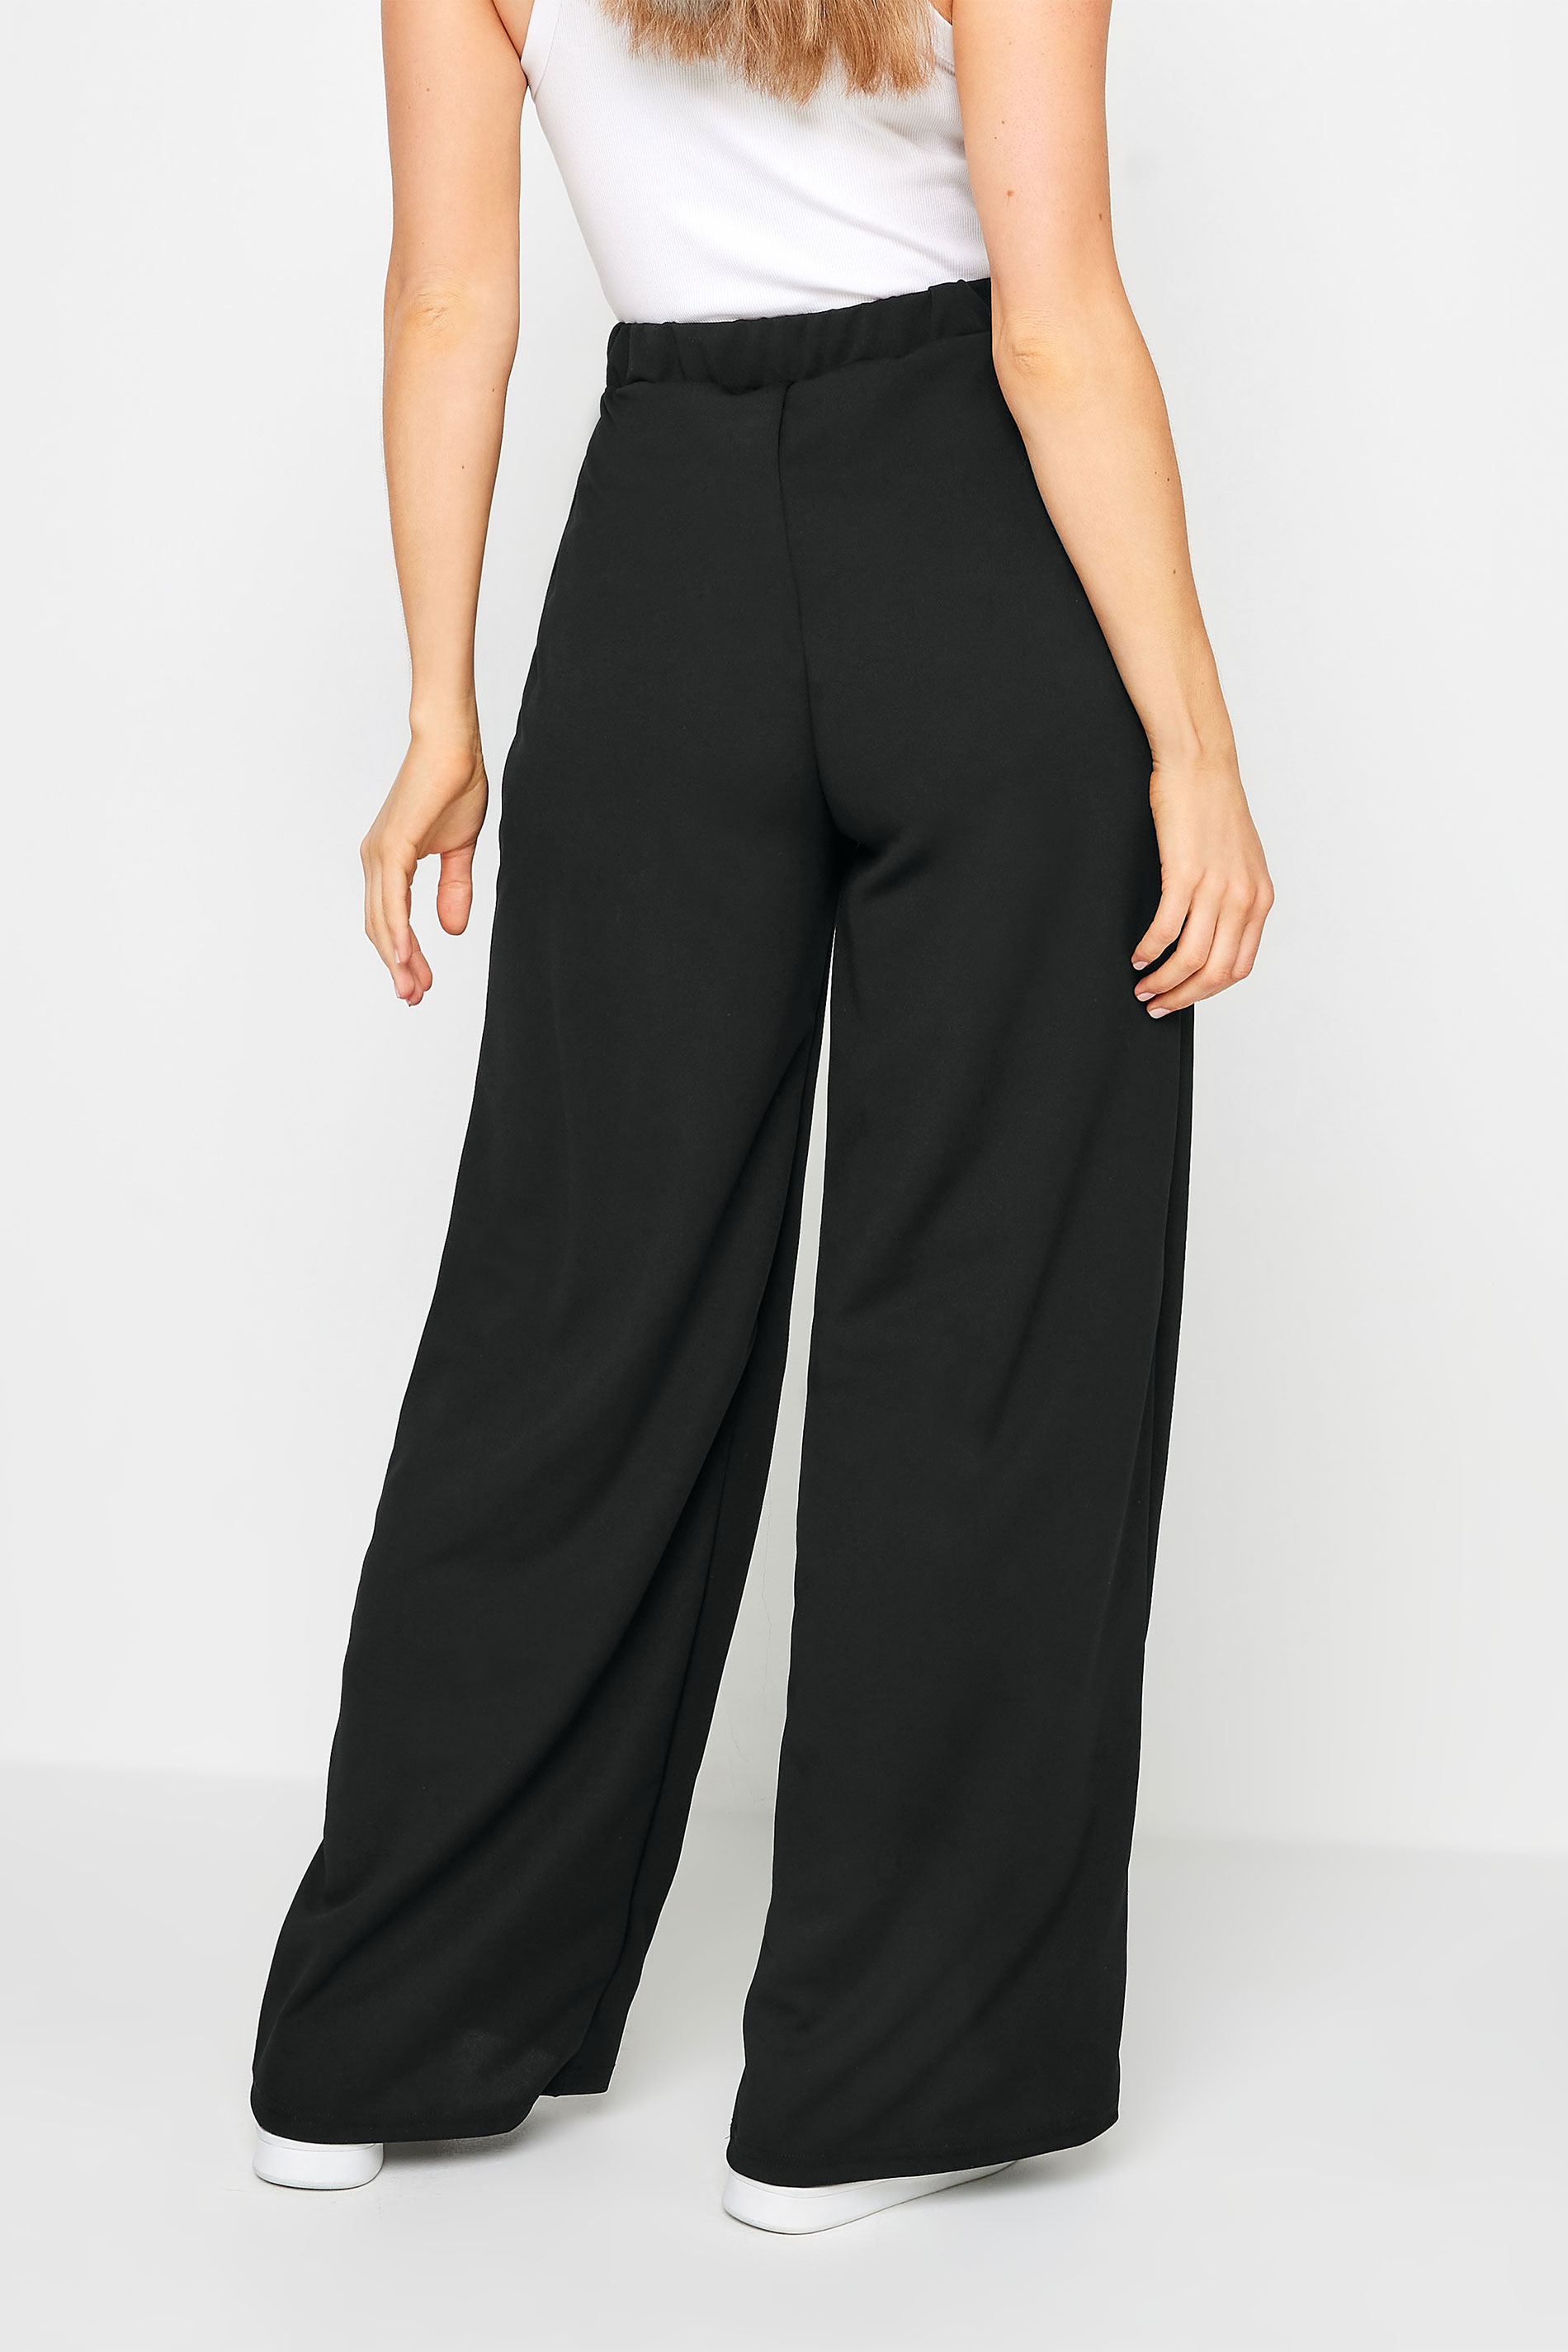 LTS Tall Womens Black Contrast Pipe Detail Wide Leg Trousers | Long Tall Sally 3